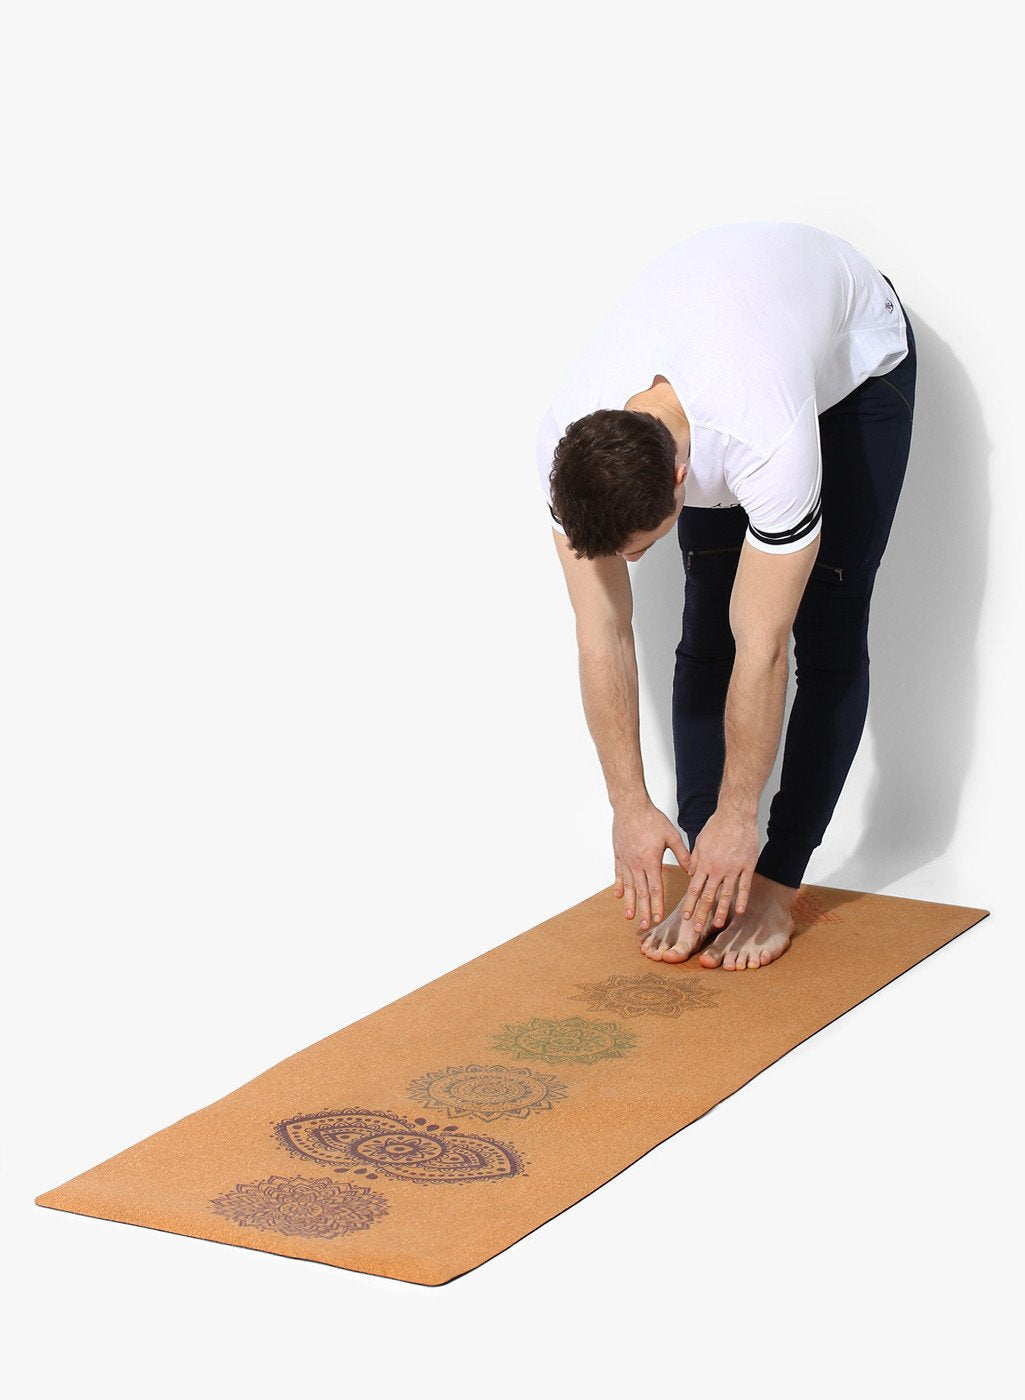 Buy Yoga Mat Bags Online - Mindful Jungle - Sustainable Natural